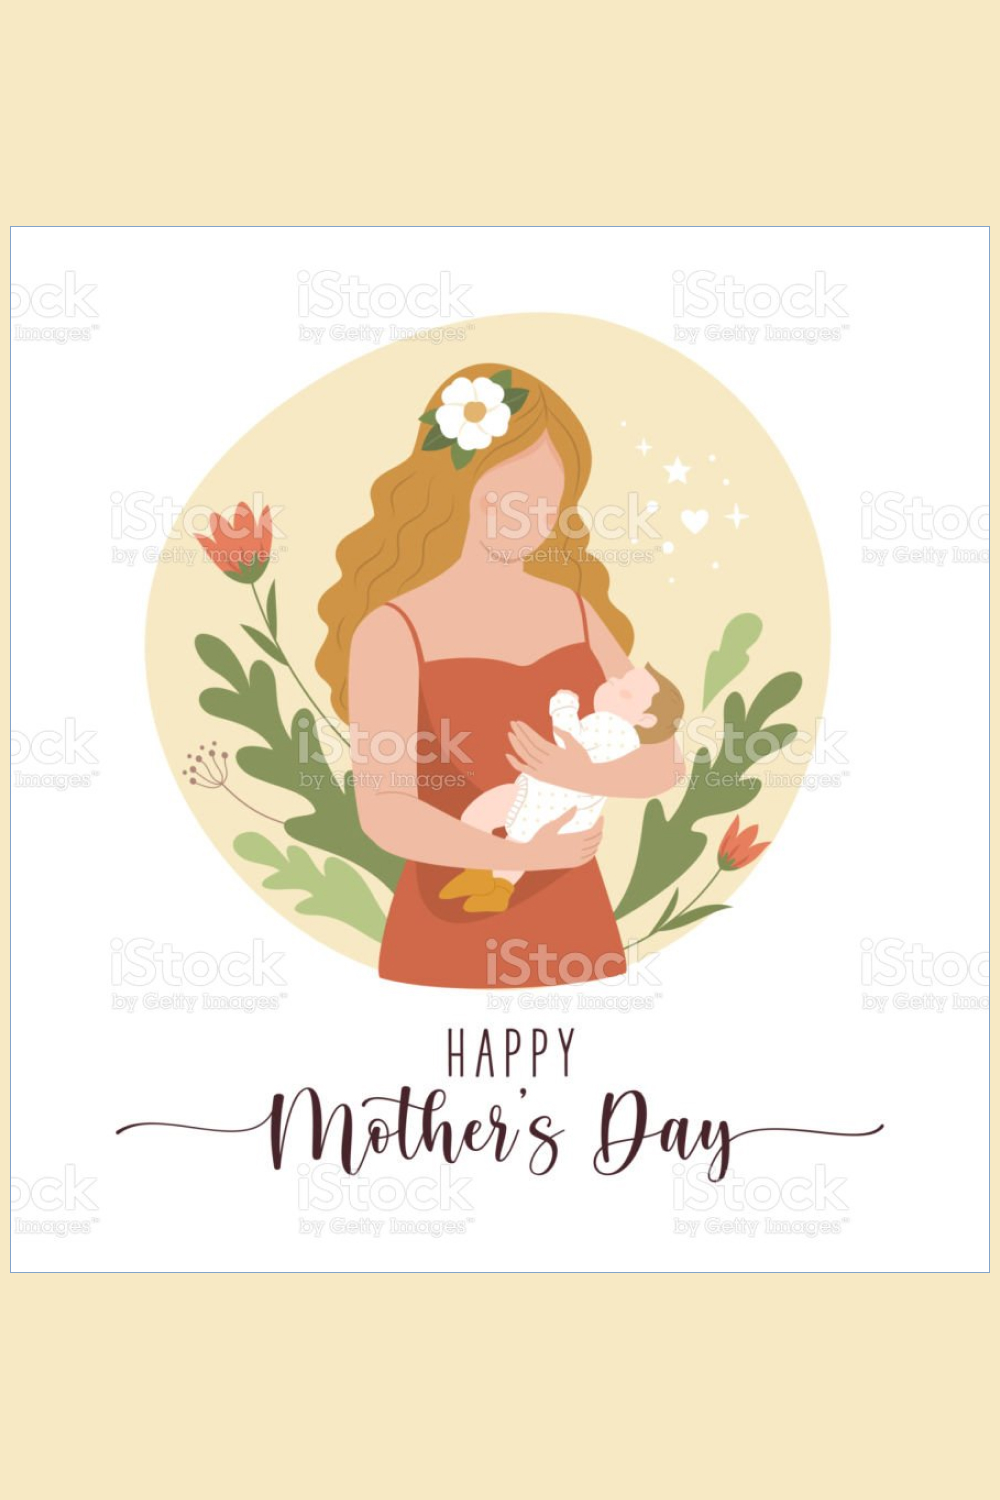 Adorable and stylish Mother’s Day image.